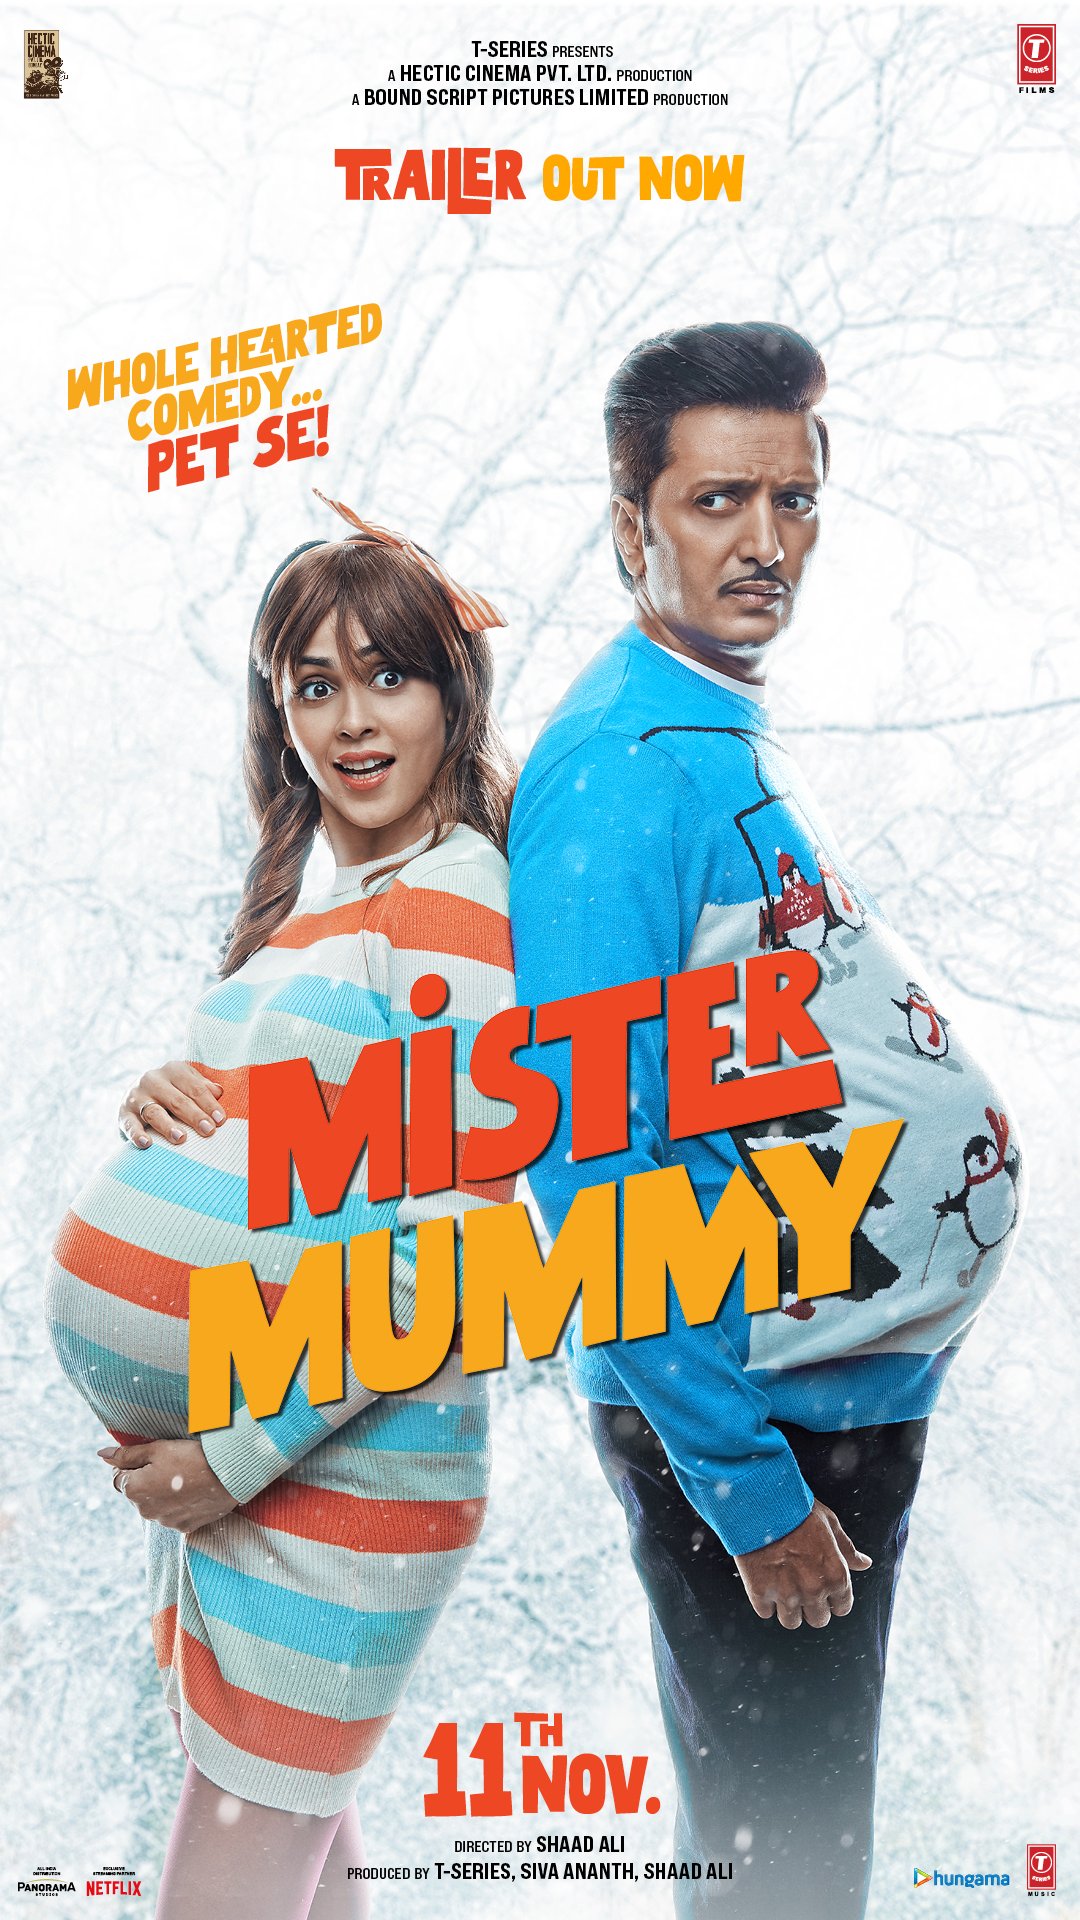 Hindi poster of the movie Mister Mummy